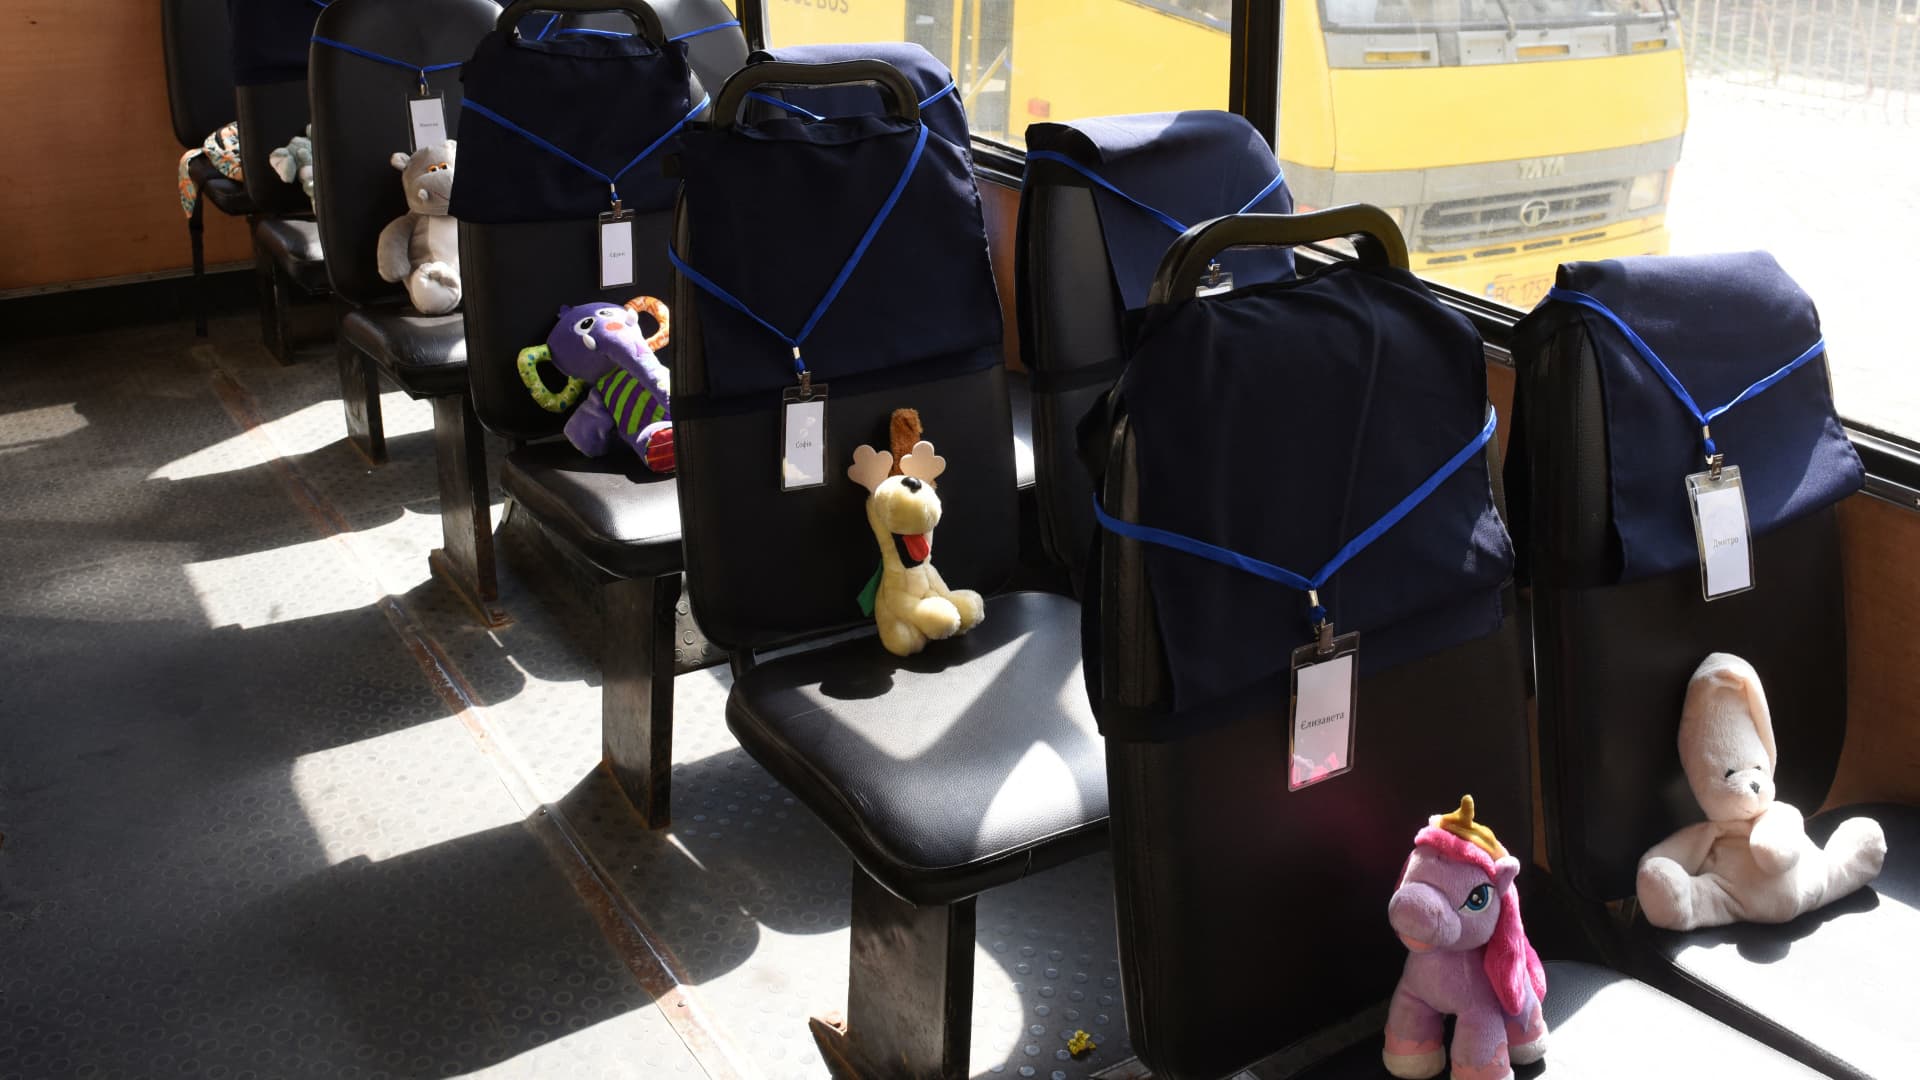 Stuffed toys symbolizing each of 243 killed Ukrainian children sit on seats in an empty yellow school buss during an action marking the International Children's Day, in Lviv on June 1, 2022, amid the Russian invasion of Ukraine. 